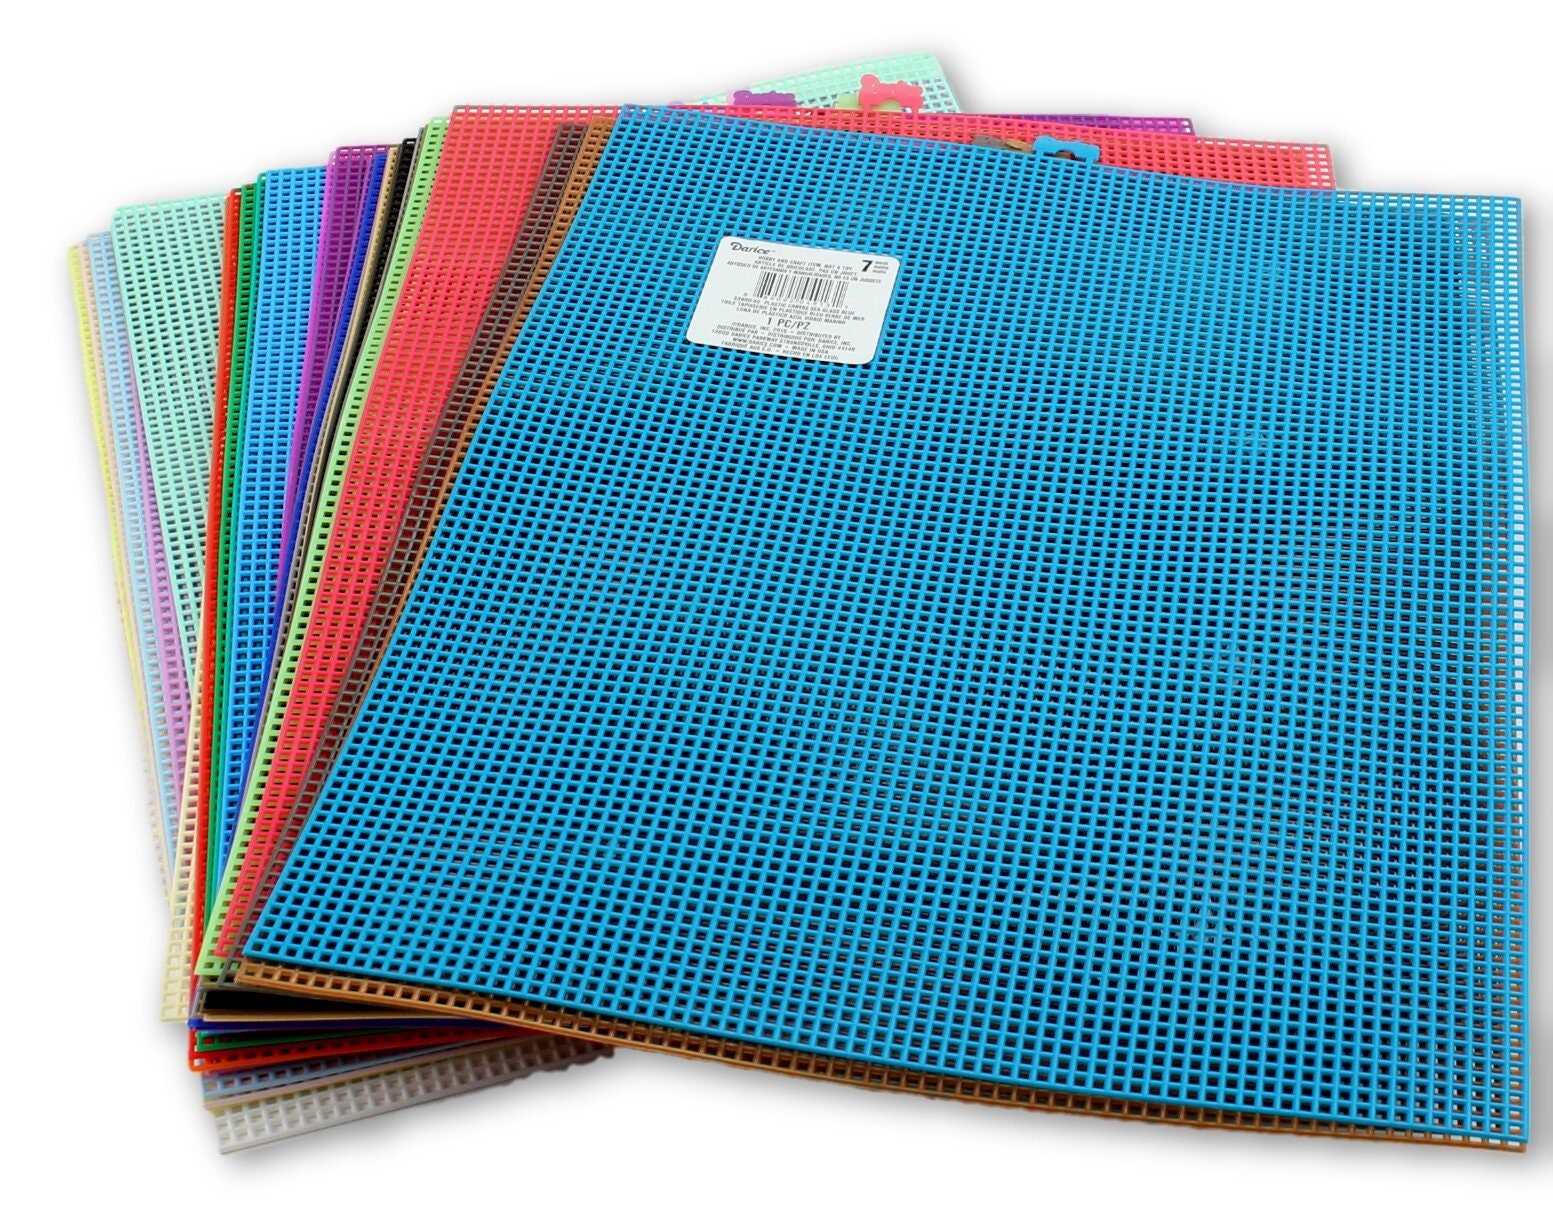 Darice Quick-Count 7 Mesh PLASTIC CANVAS 10.5 x 13.5 - Variety of Color  Choice 